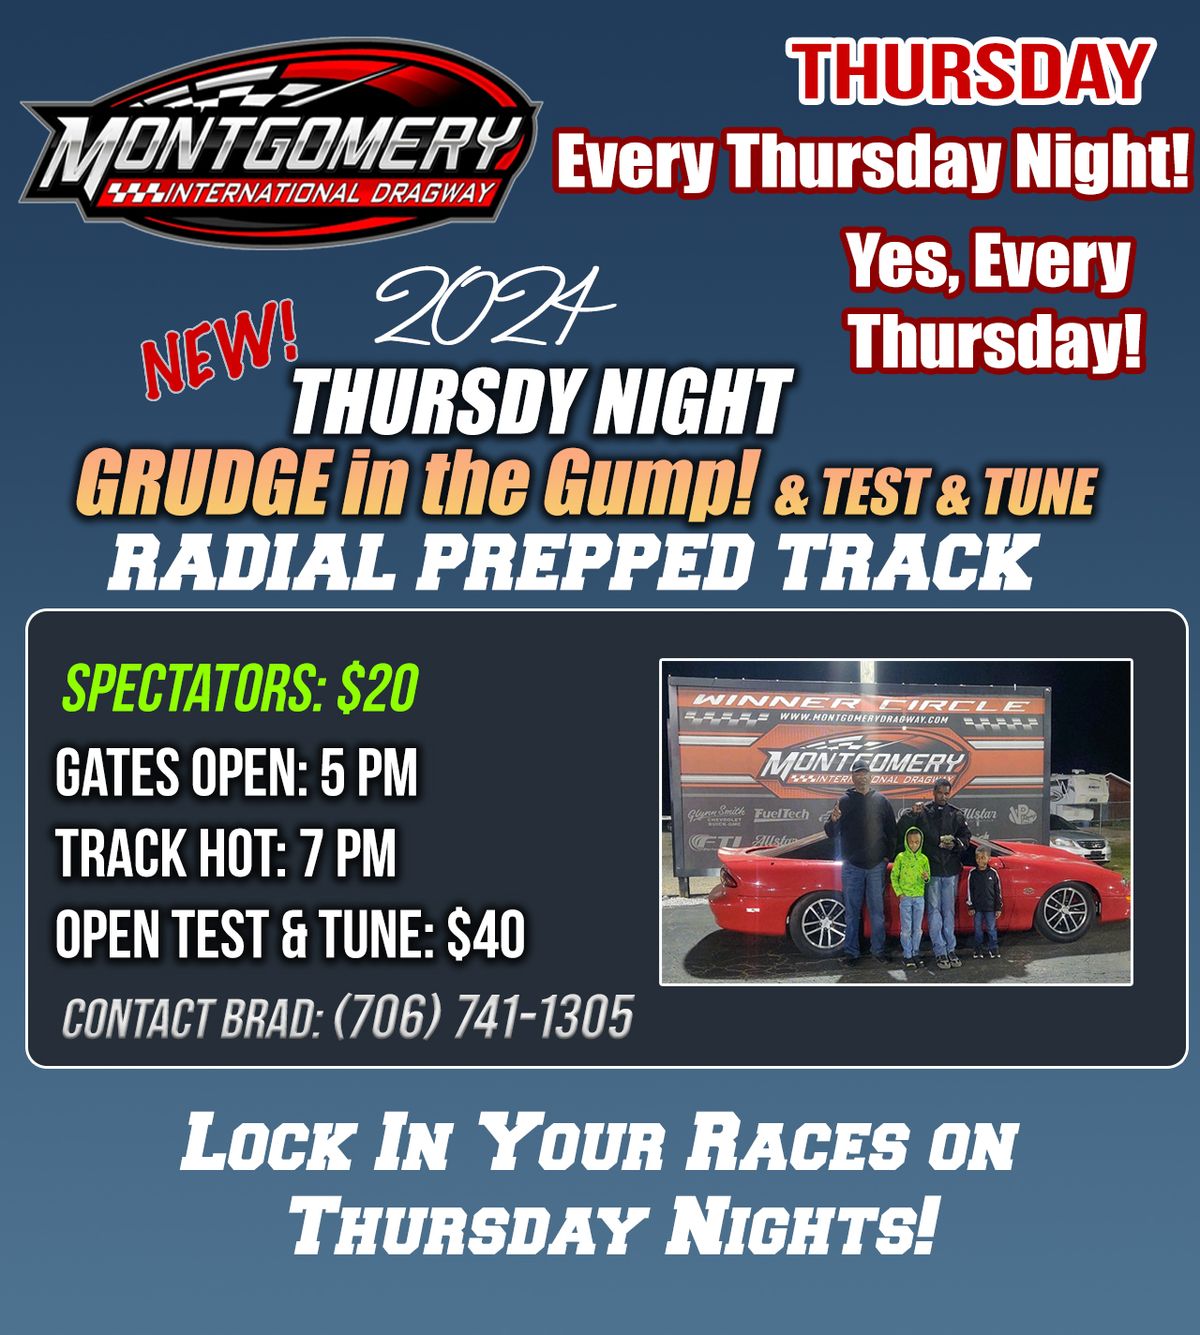 Thursday Night Local Grude and Test\/Tune - Radial Prepped